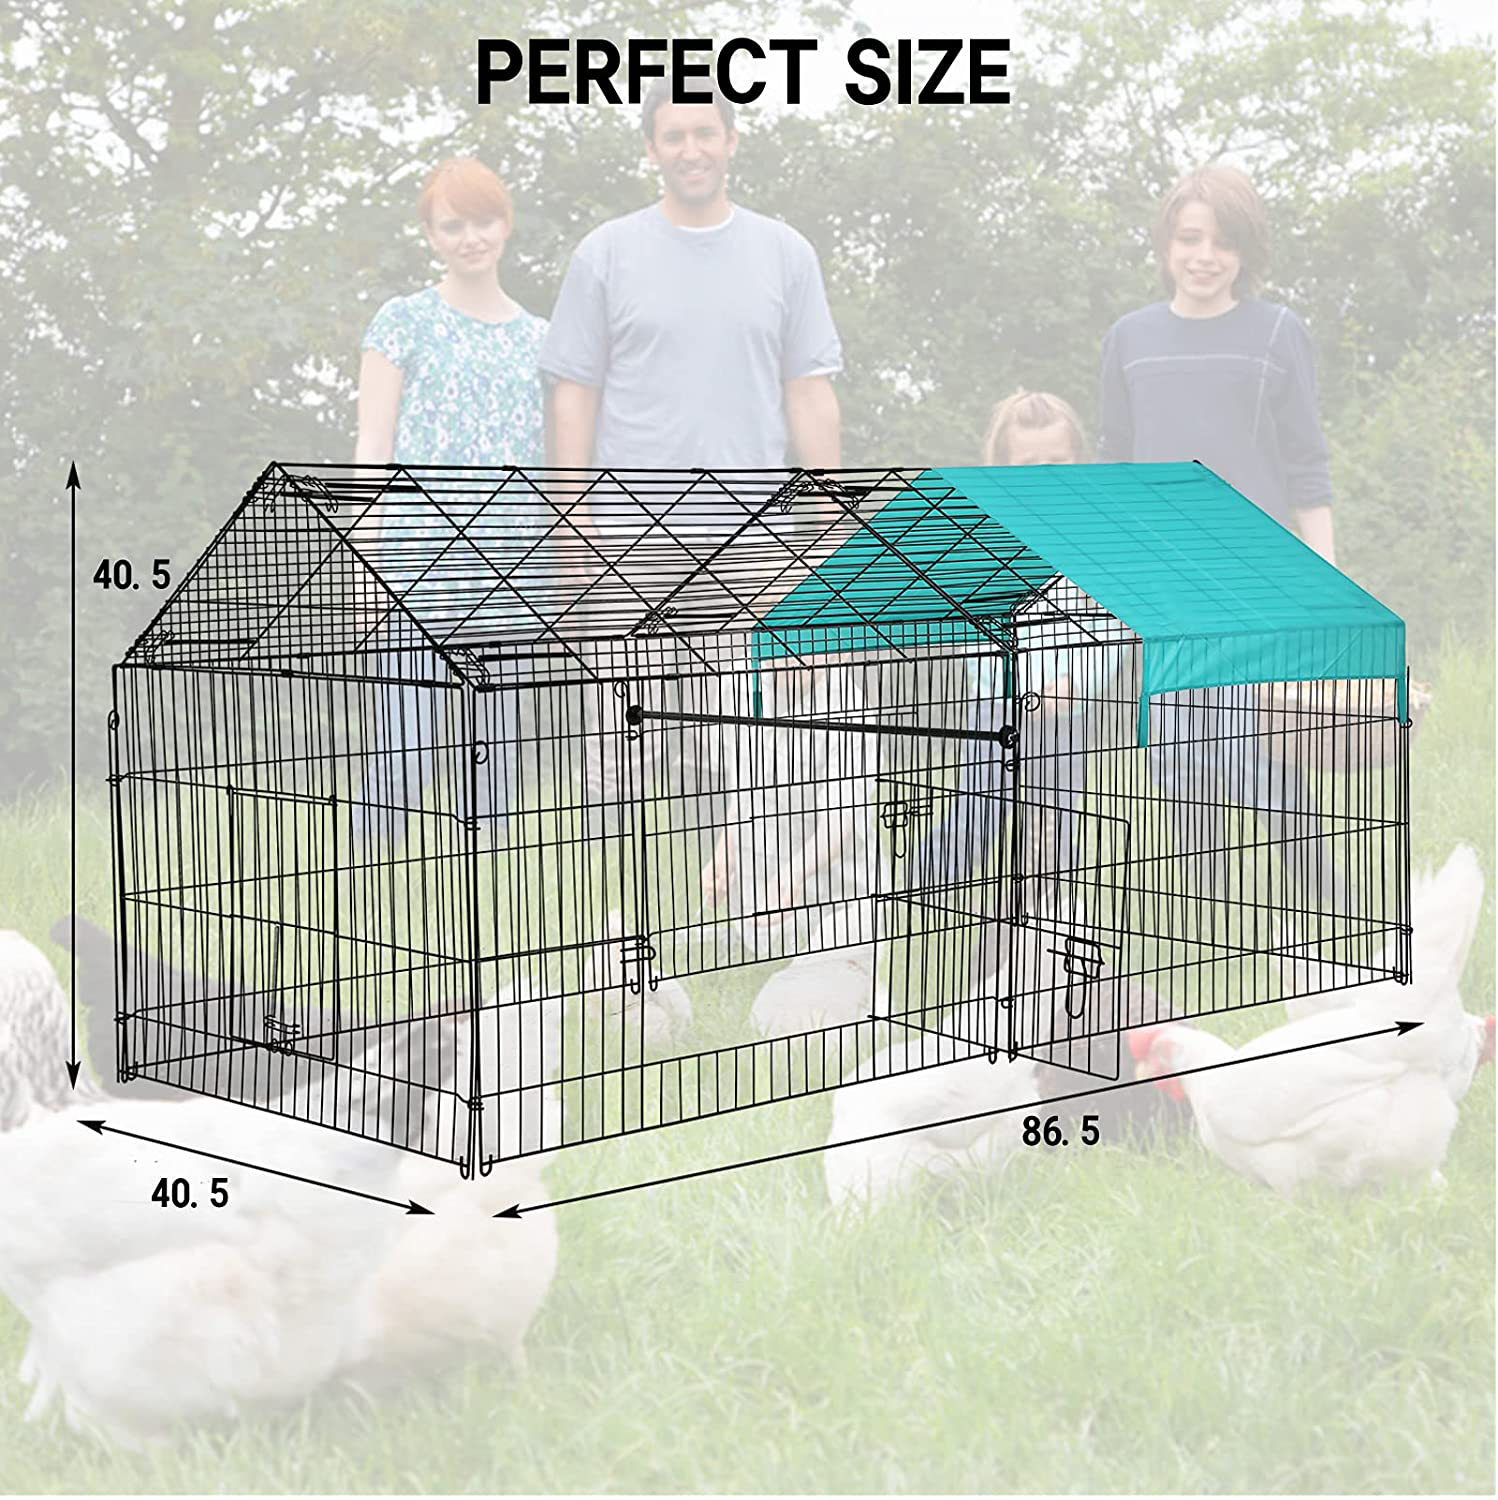 Tyyps Large Metal Chicken Coop Walk-In Poultry Cage Kennel with Waterproof and Anti-Ultraviolet Cover Fence Pet Playpen Foldable Outdoor for Backyard Farm, Black